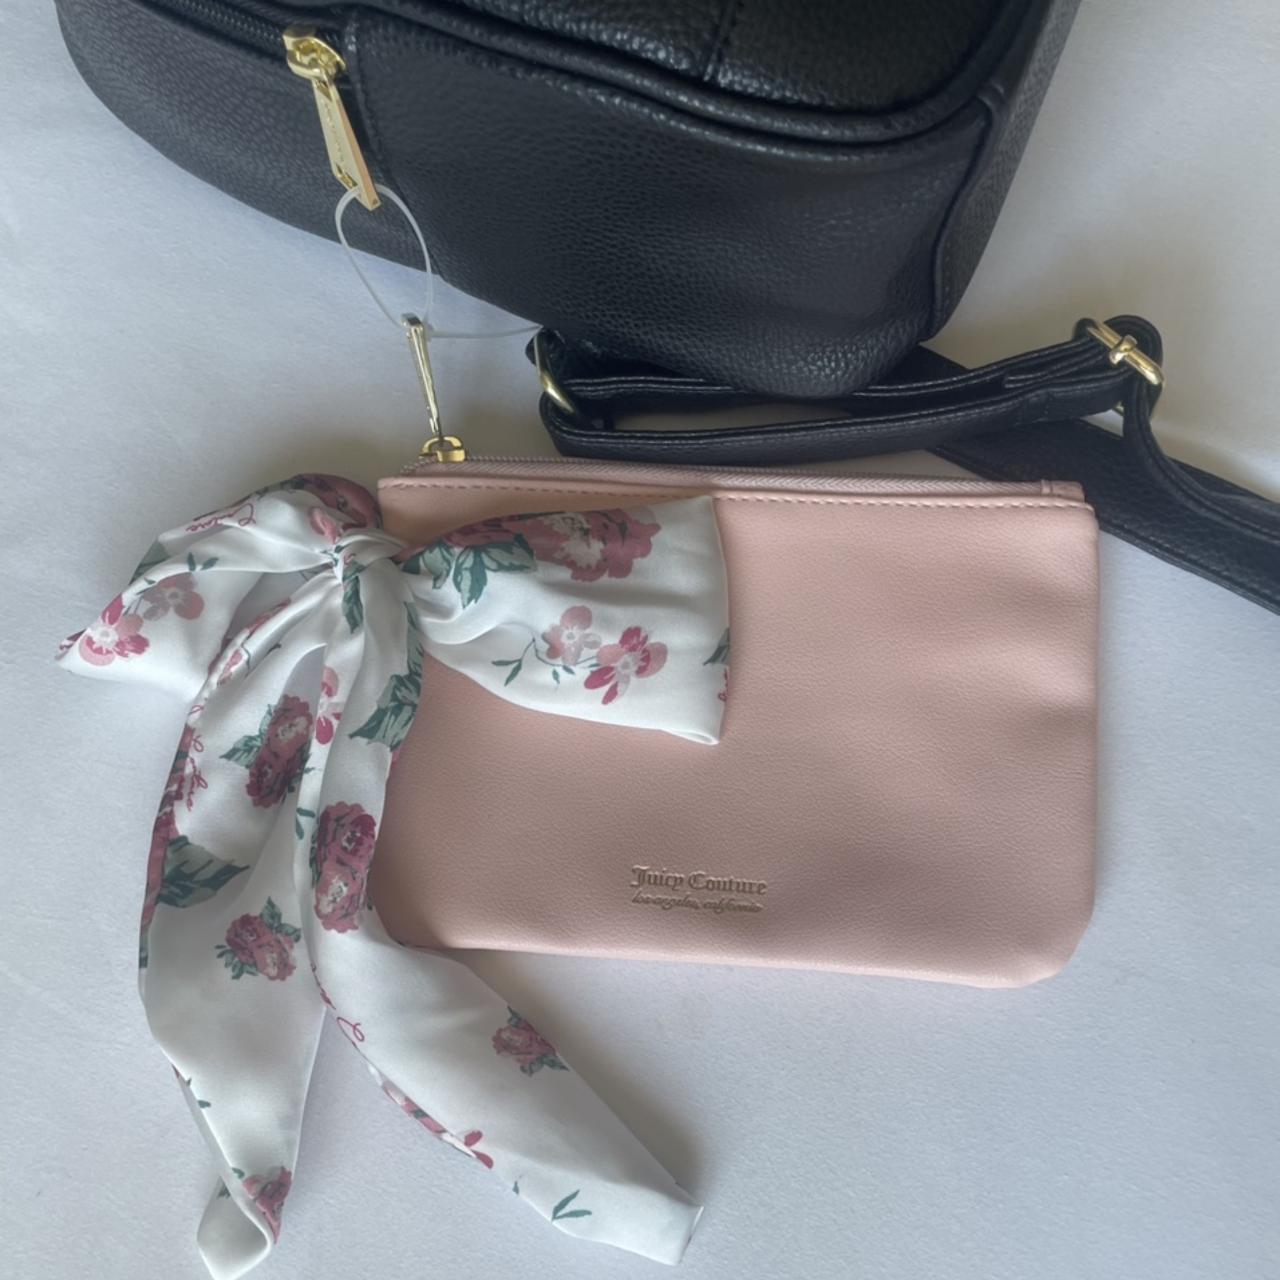 Convertible Backpack & Purse in pink, Vegan Leather - Depop